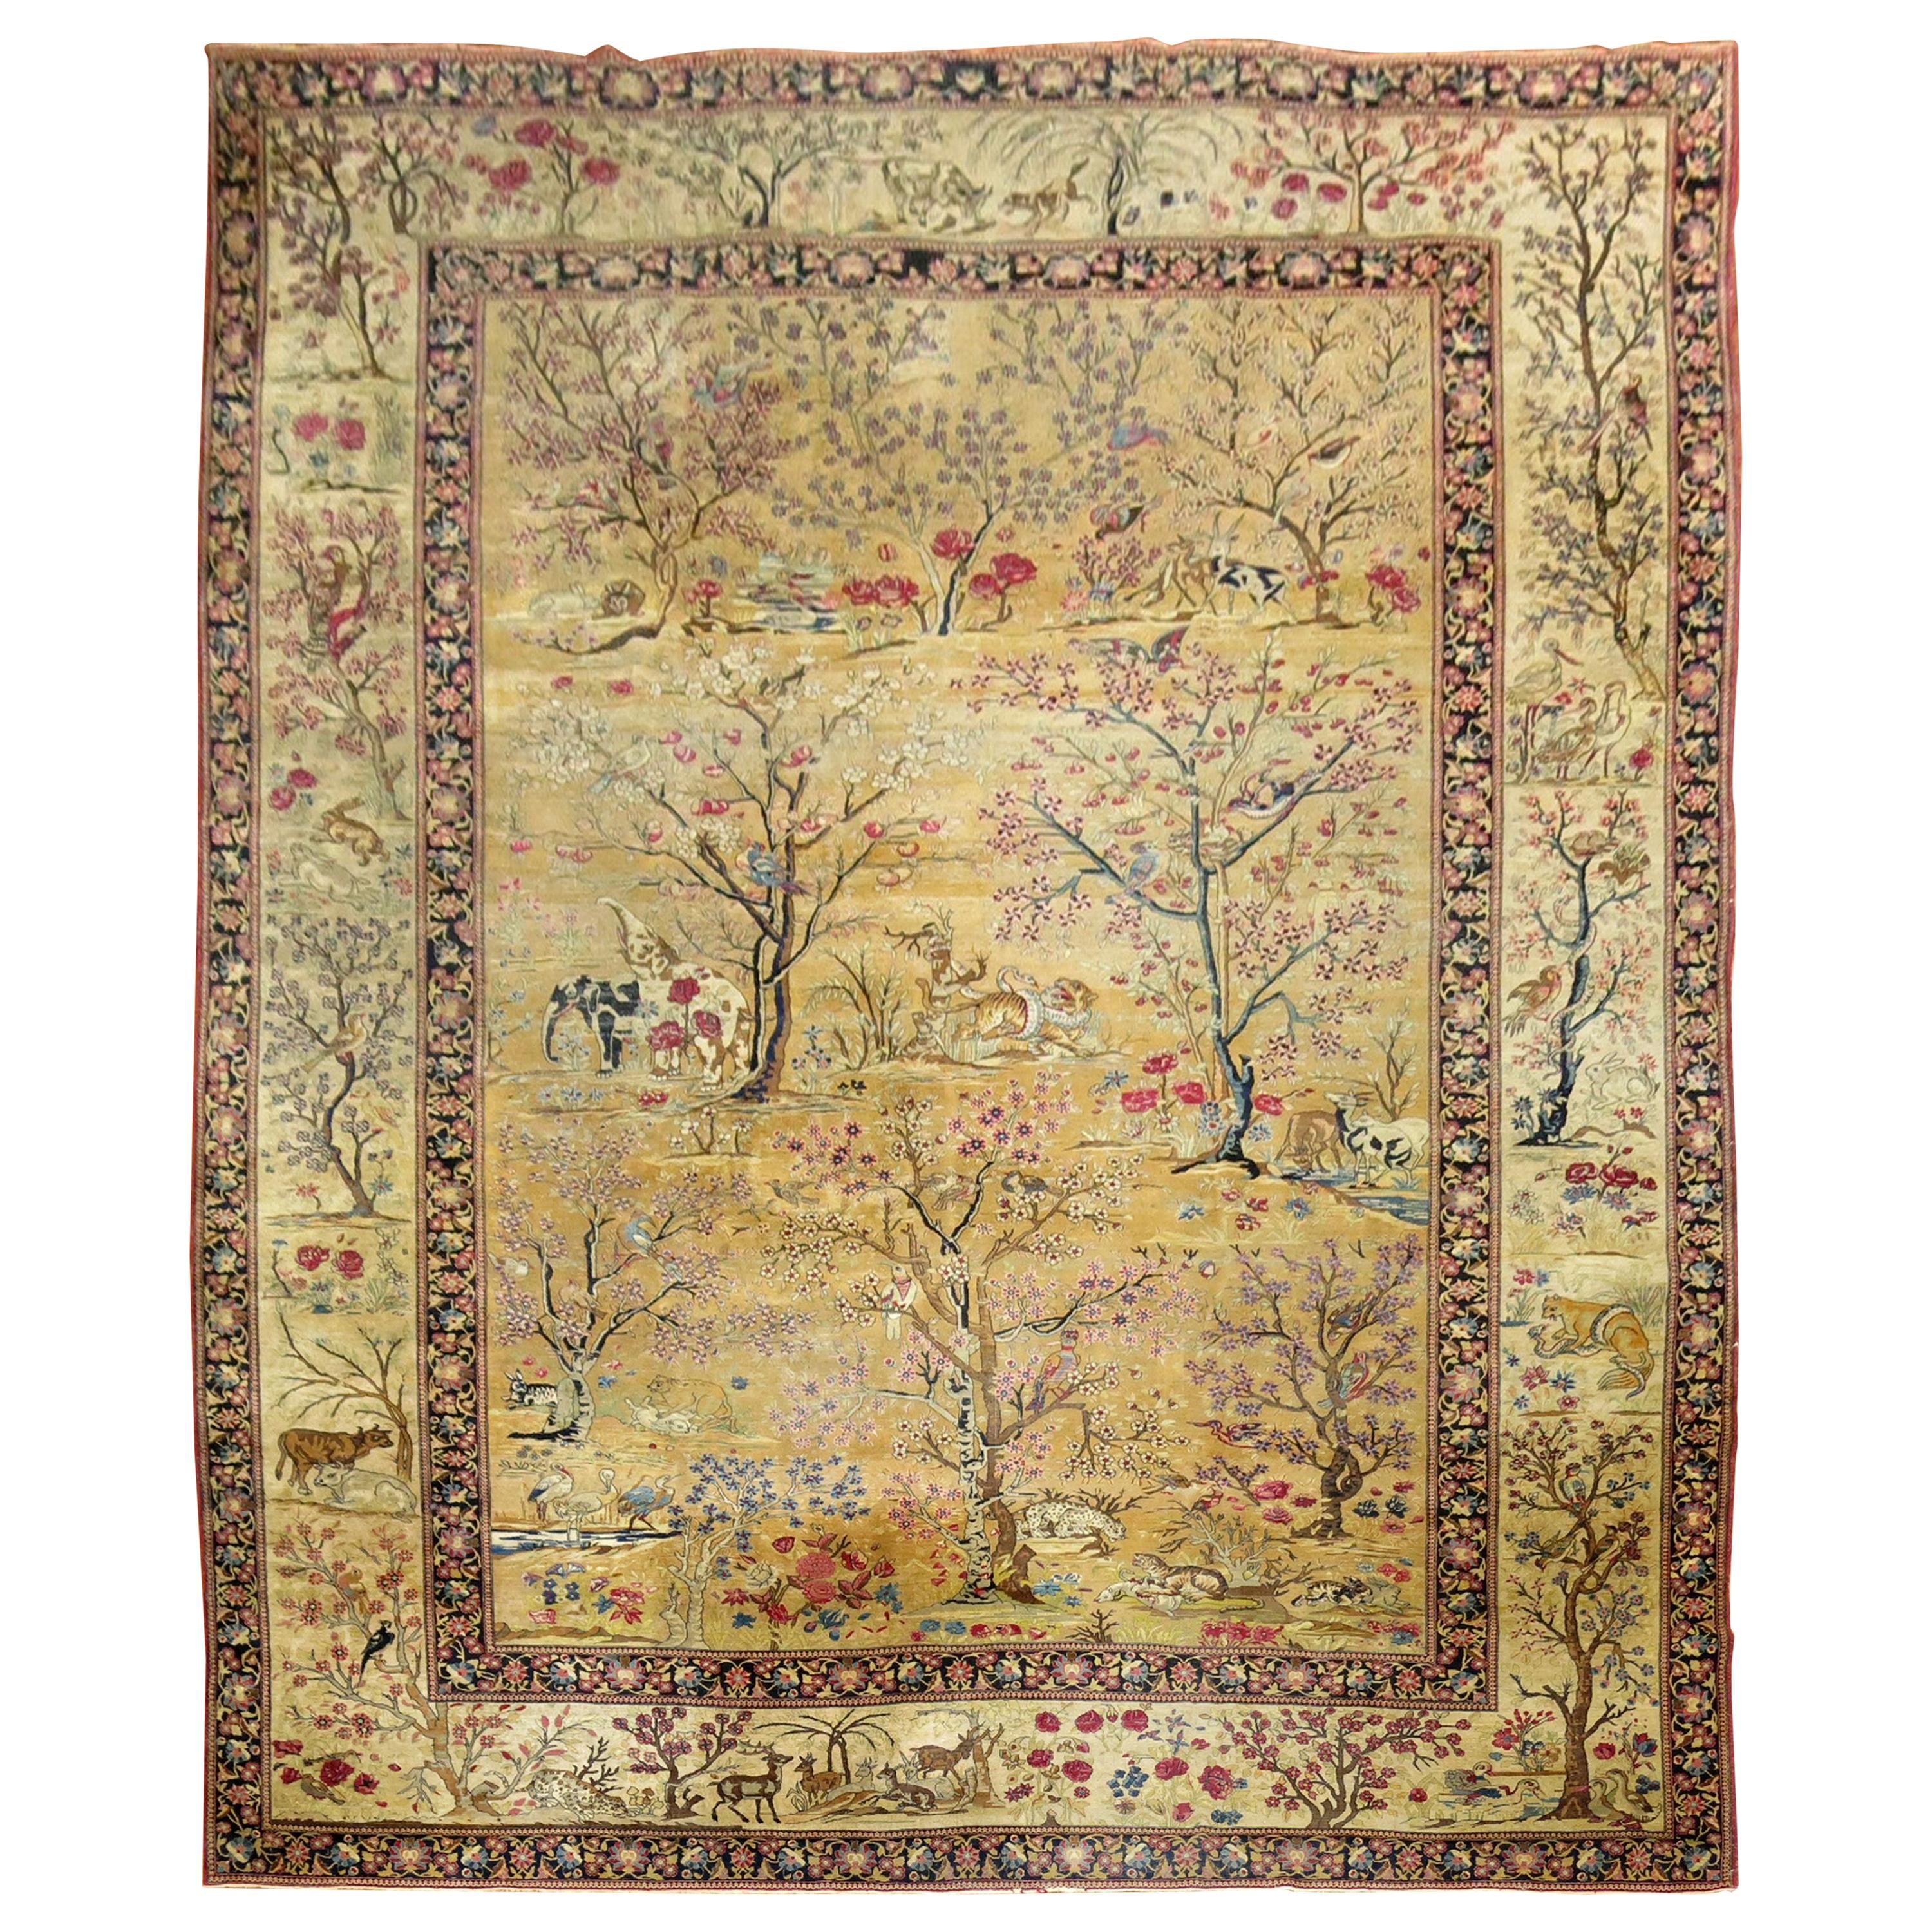 Persian Pictorial Animal Landscape Rug